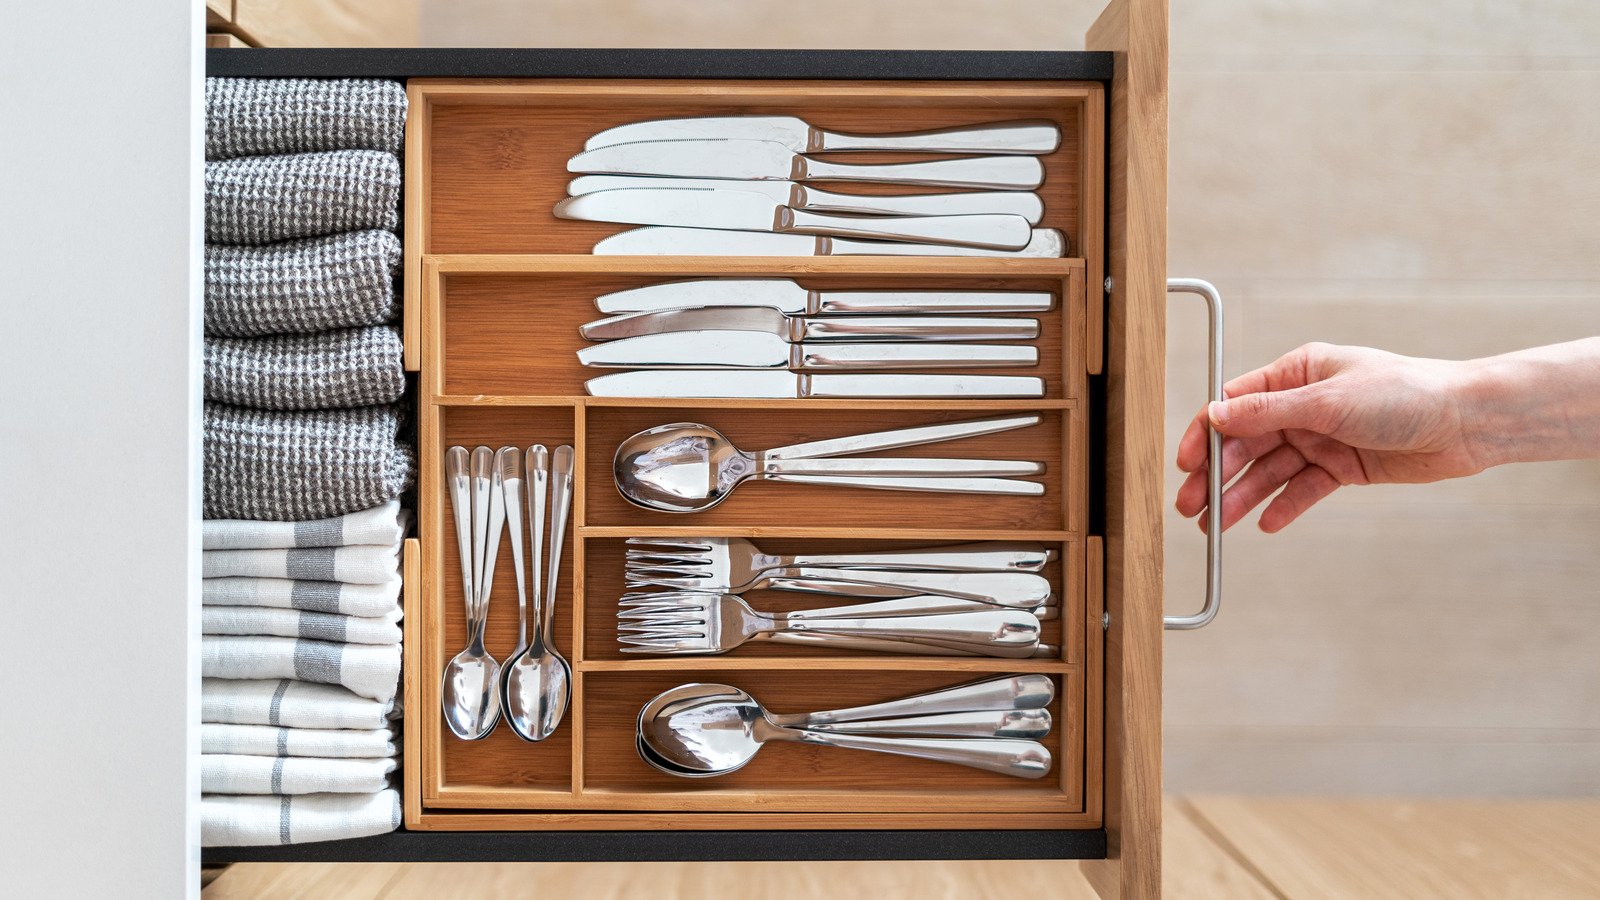 How A Pool Noodle Can Help Organize Your Kitchen Drawers